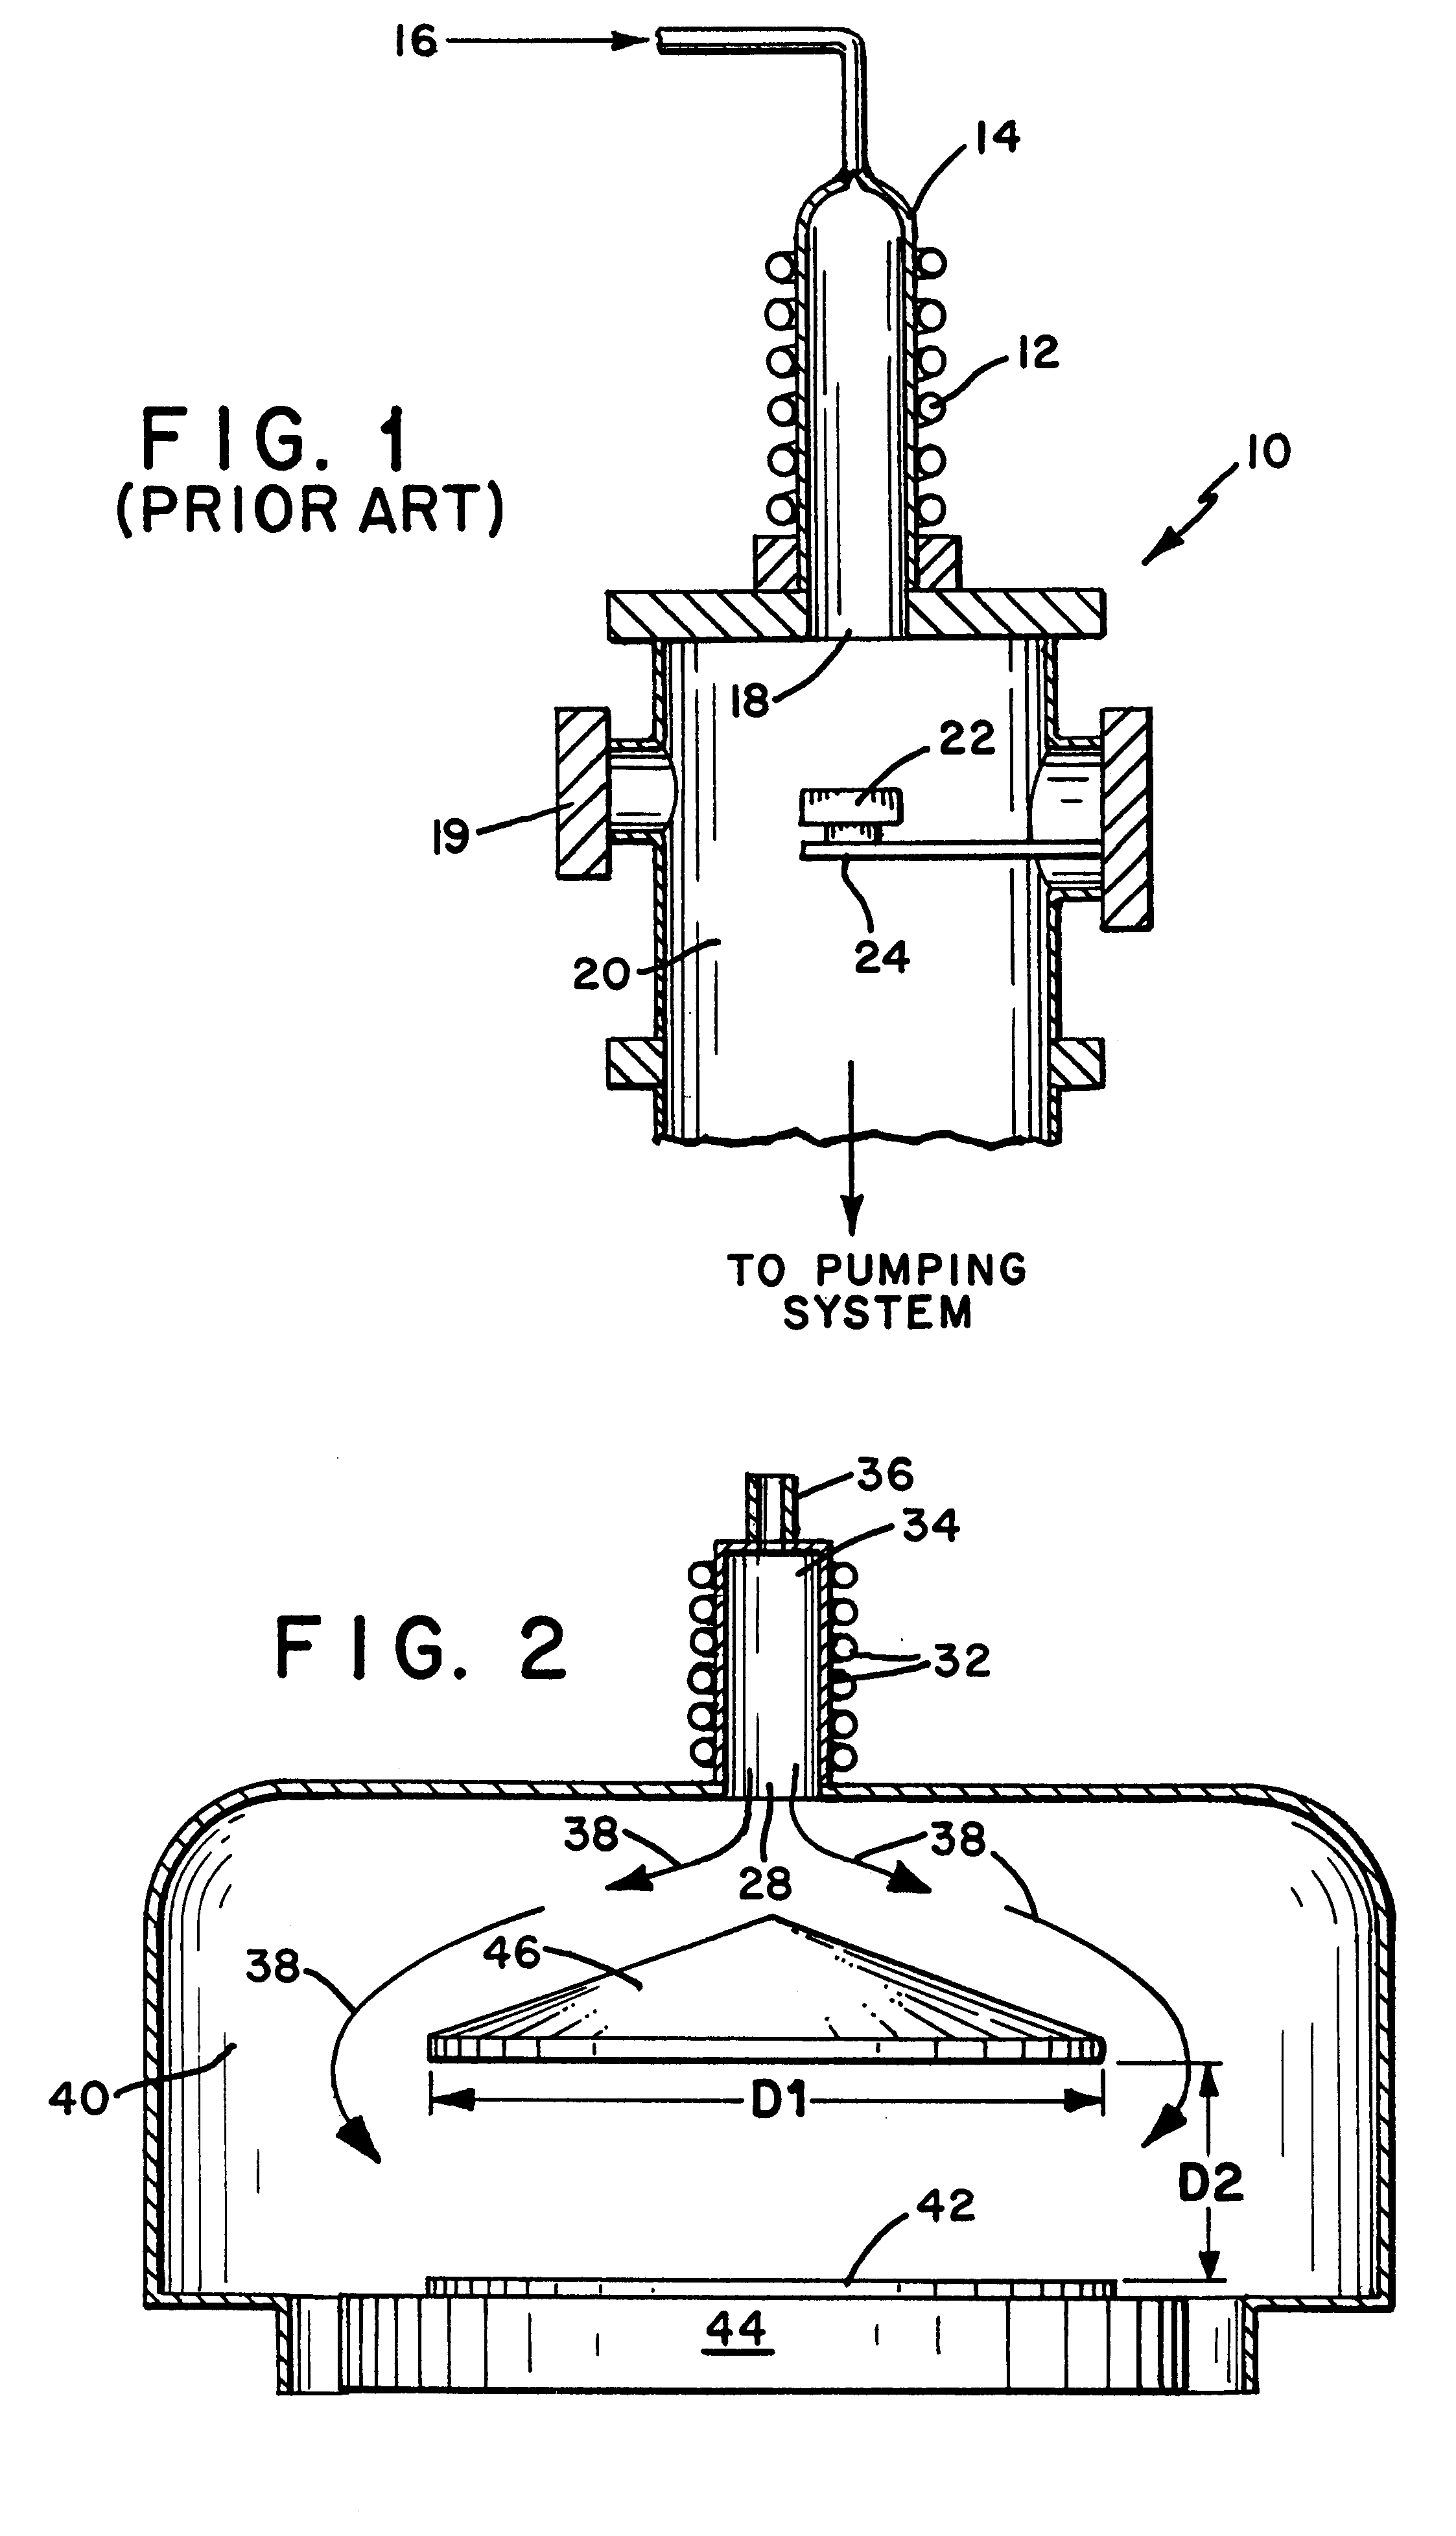 Apparatus and method for injecting and modifying gas concentration of a meta-stable or atomic species in a downstream plasma reactor